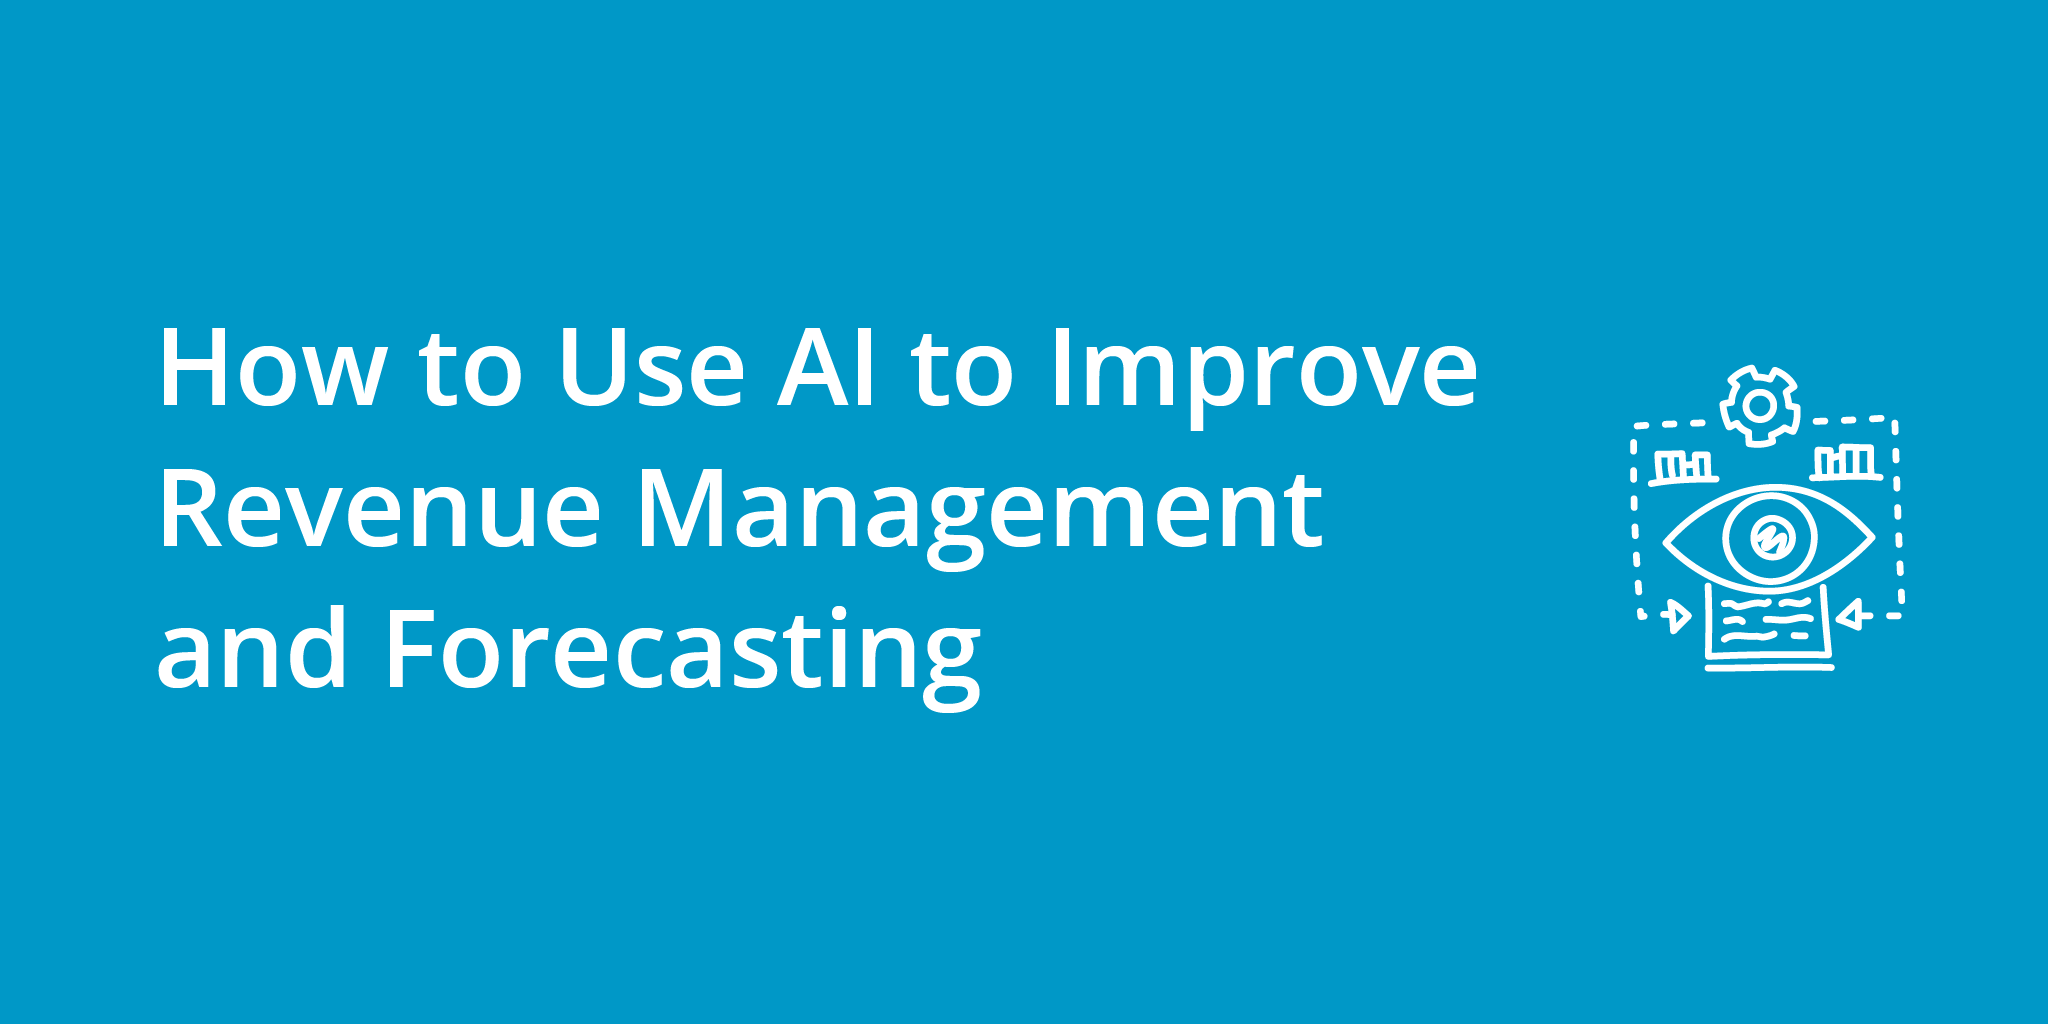 How to Use AI to Improve Revenue Management and Forecasting | Telephones for business